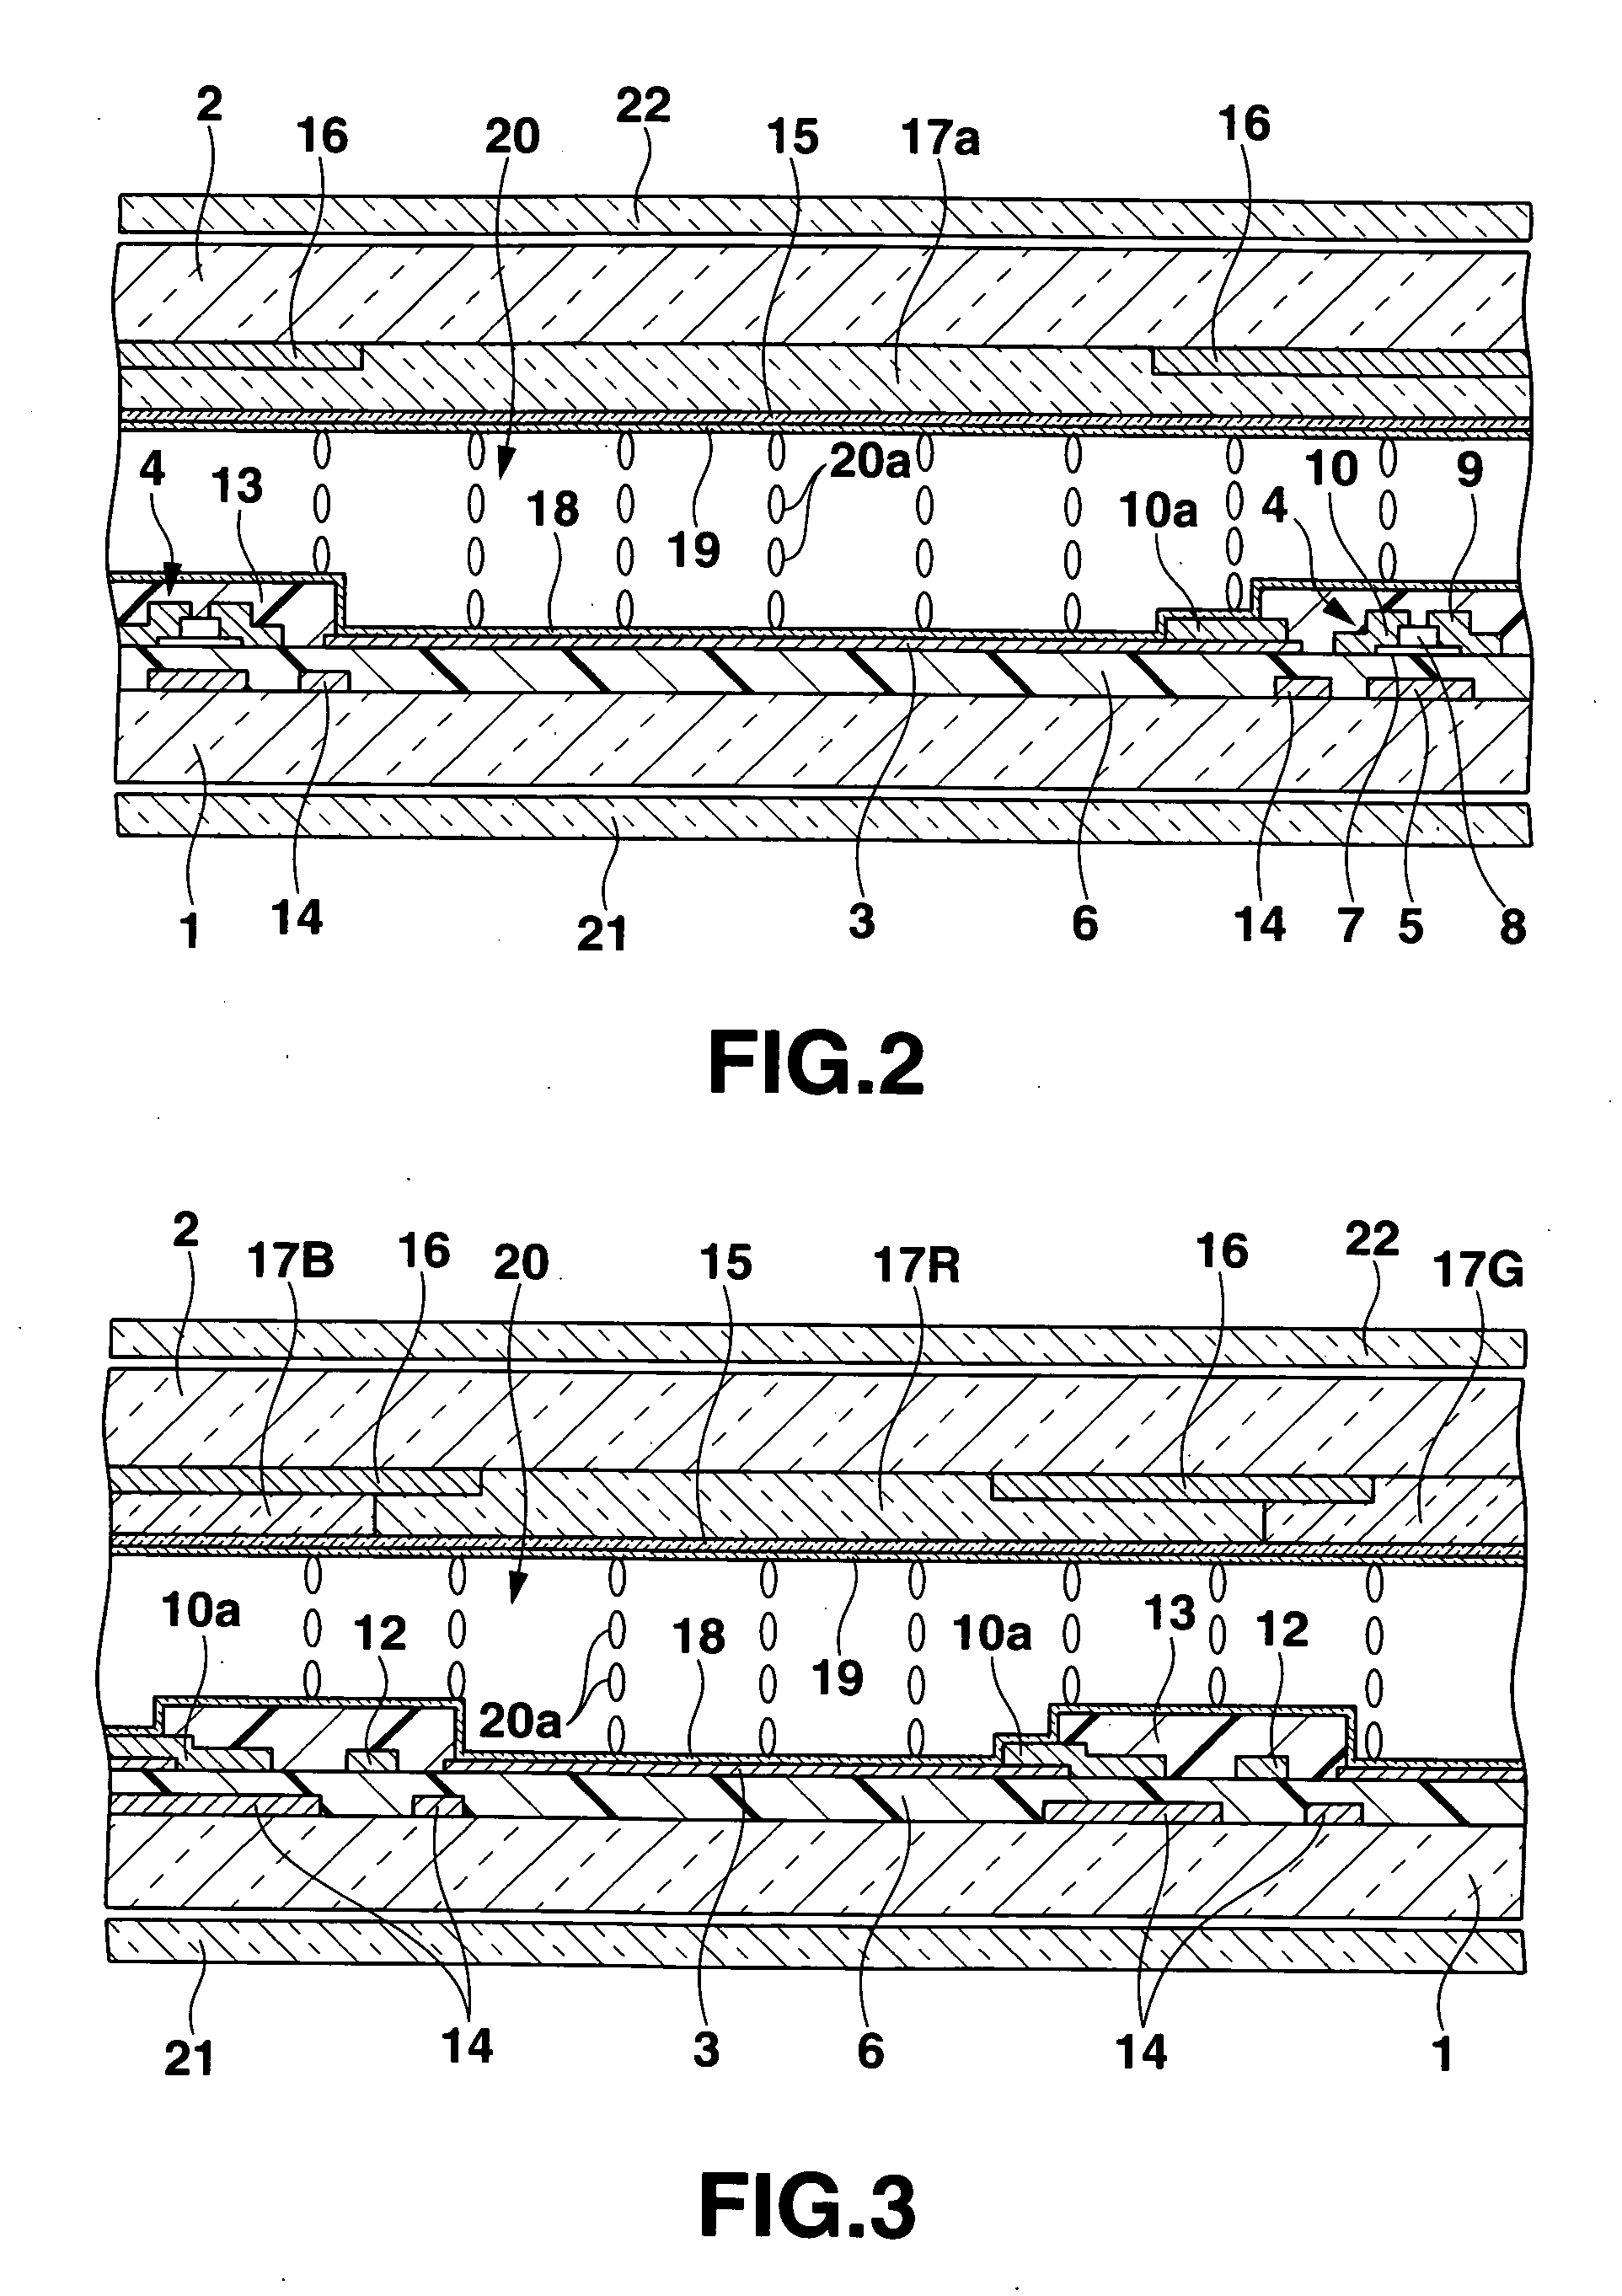 Vertical-alignment liquid crystal display device